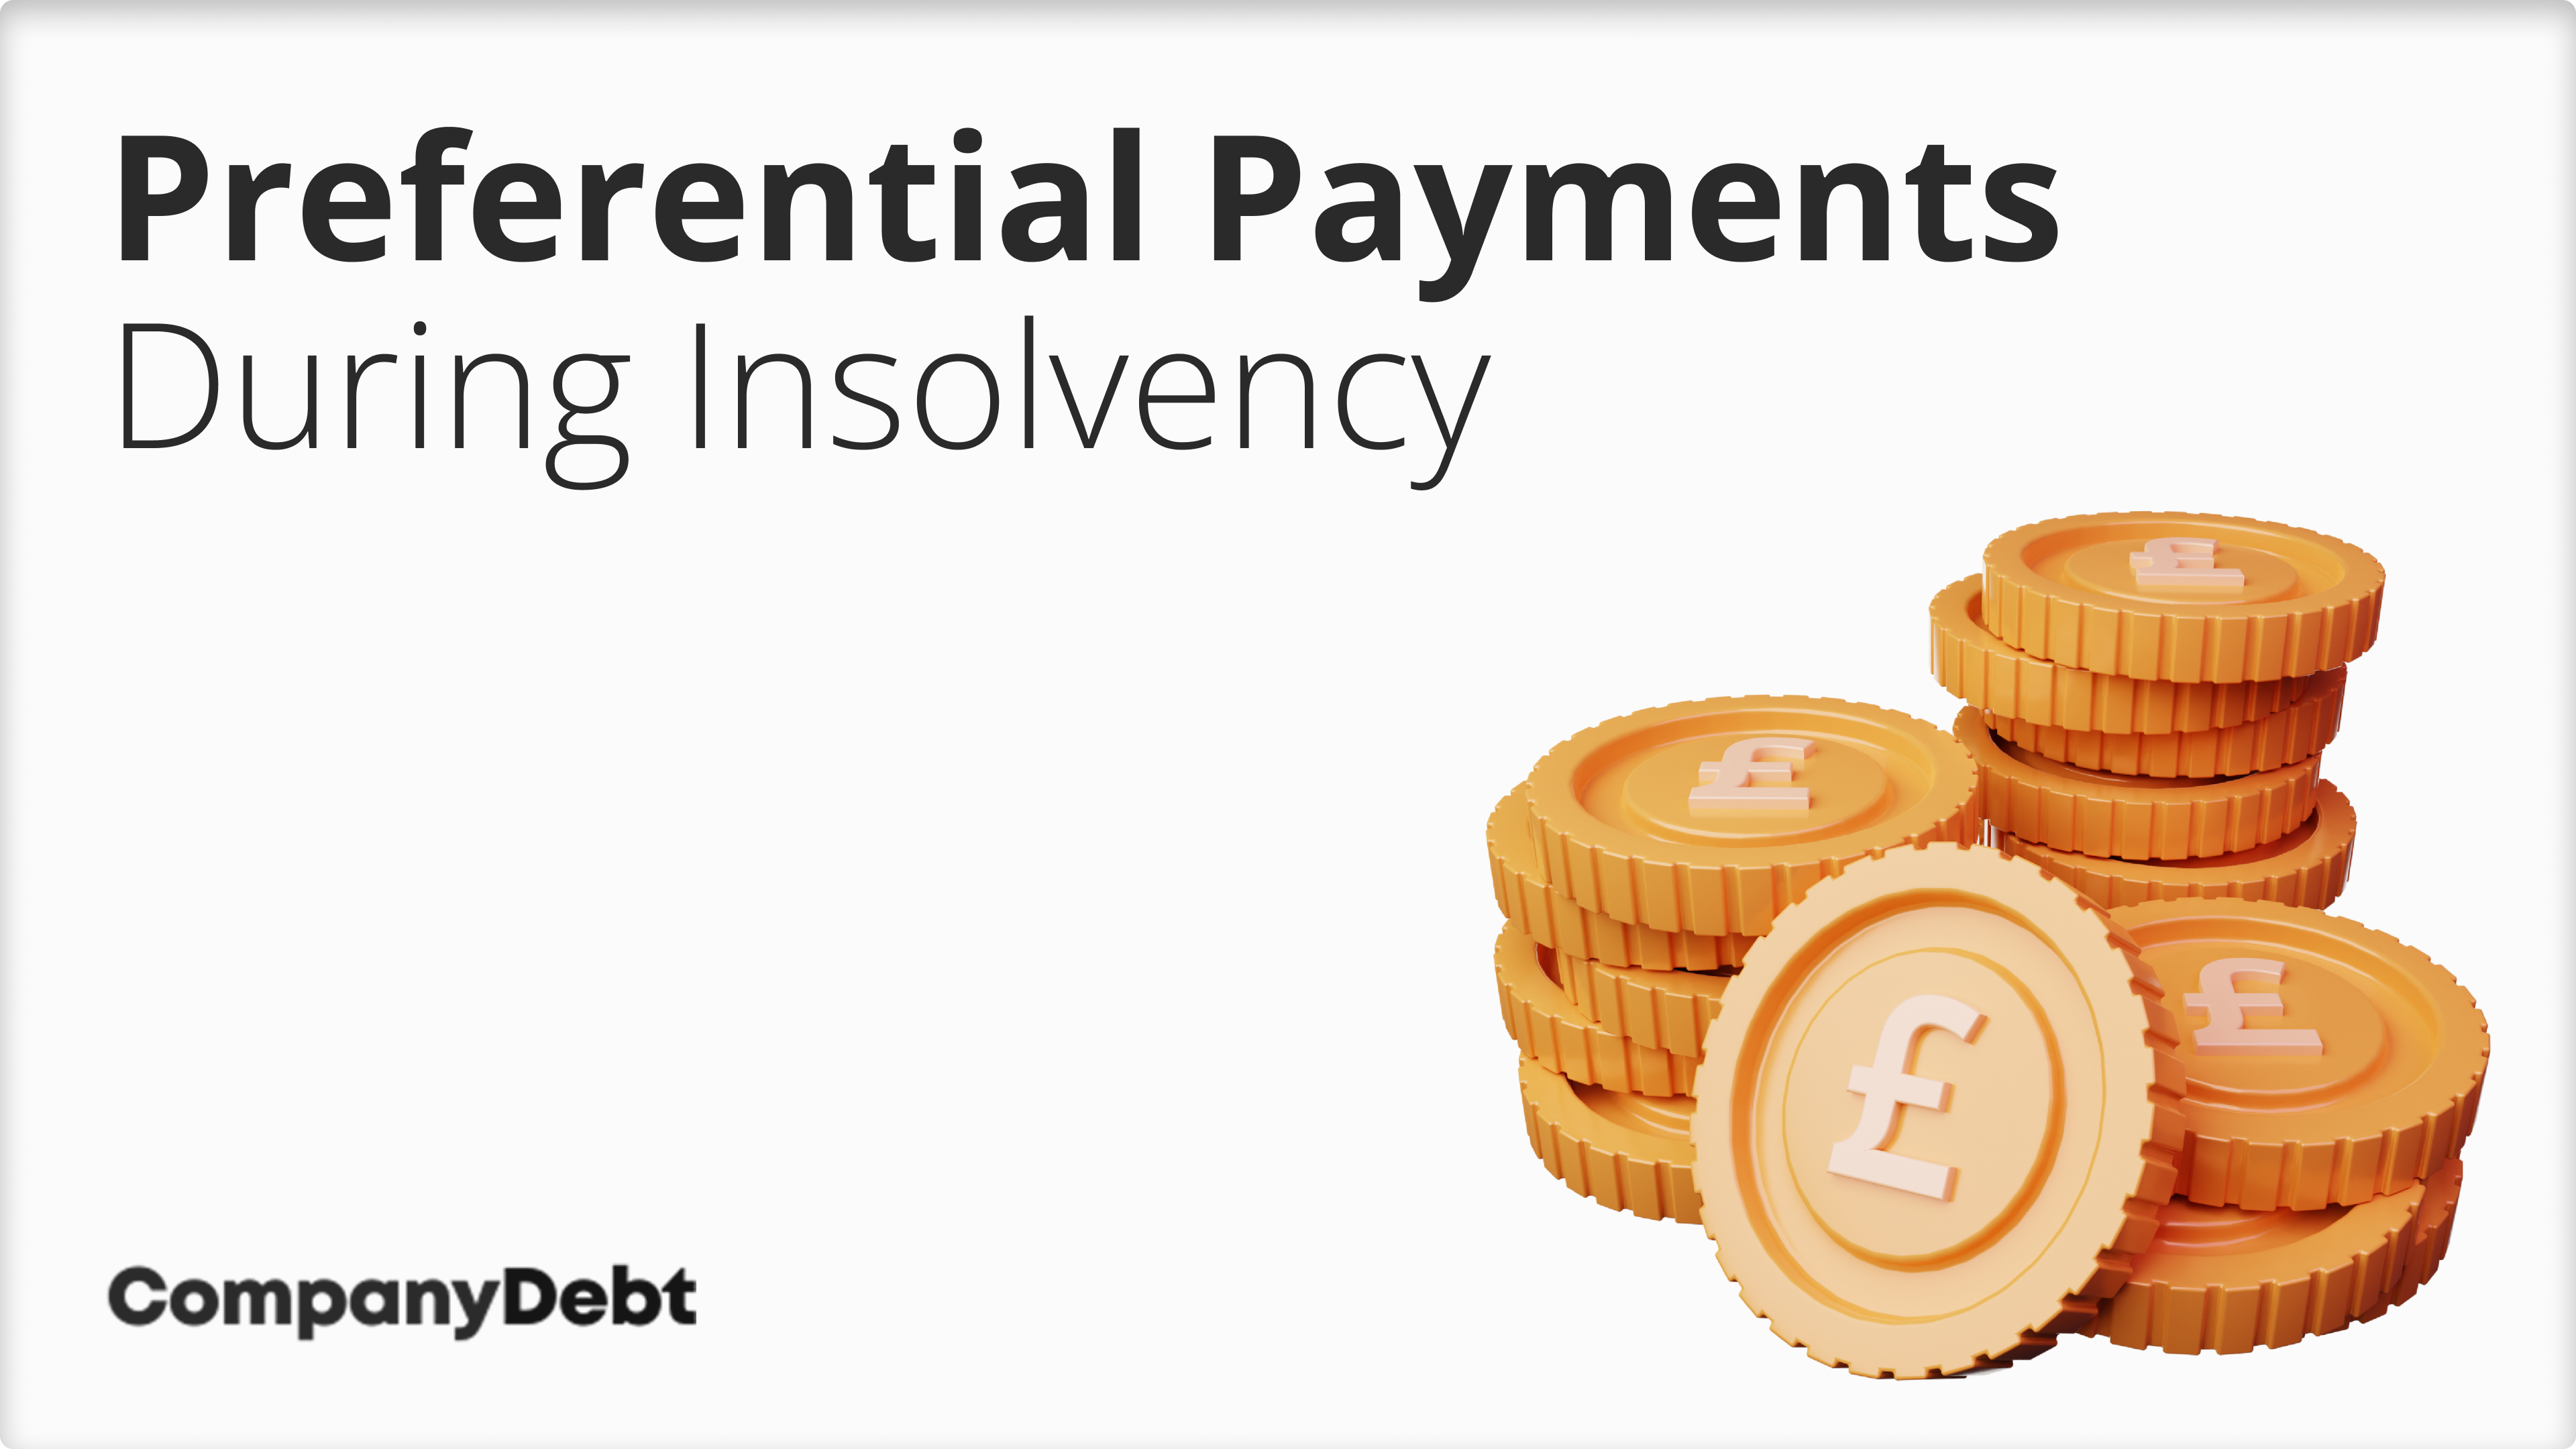 Preferential Payments During Insolvency